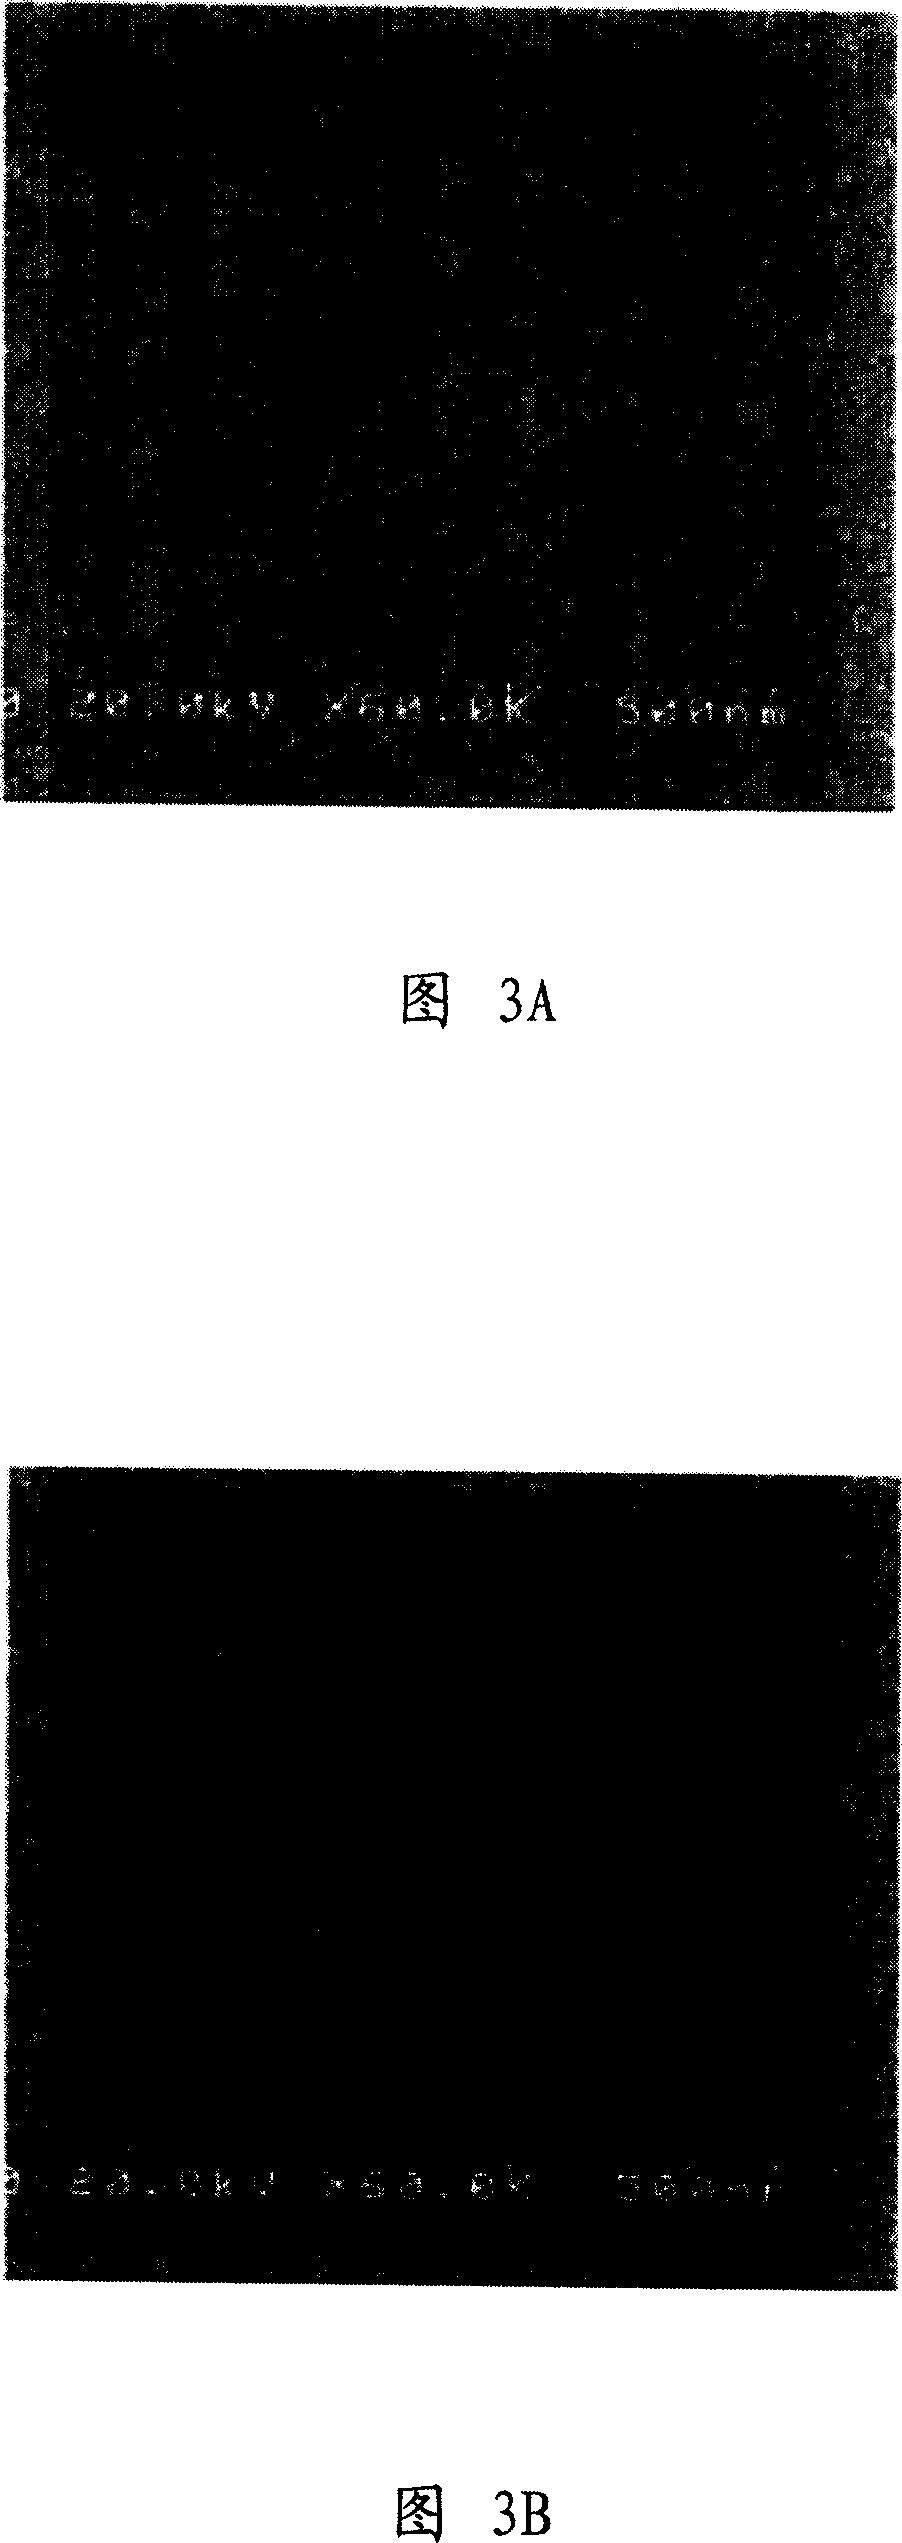 GESBTE thin film manufacturing method, phase-change direct-access storage and manufacturing method therefor